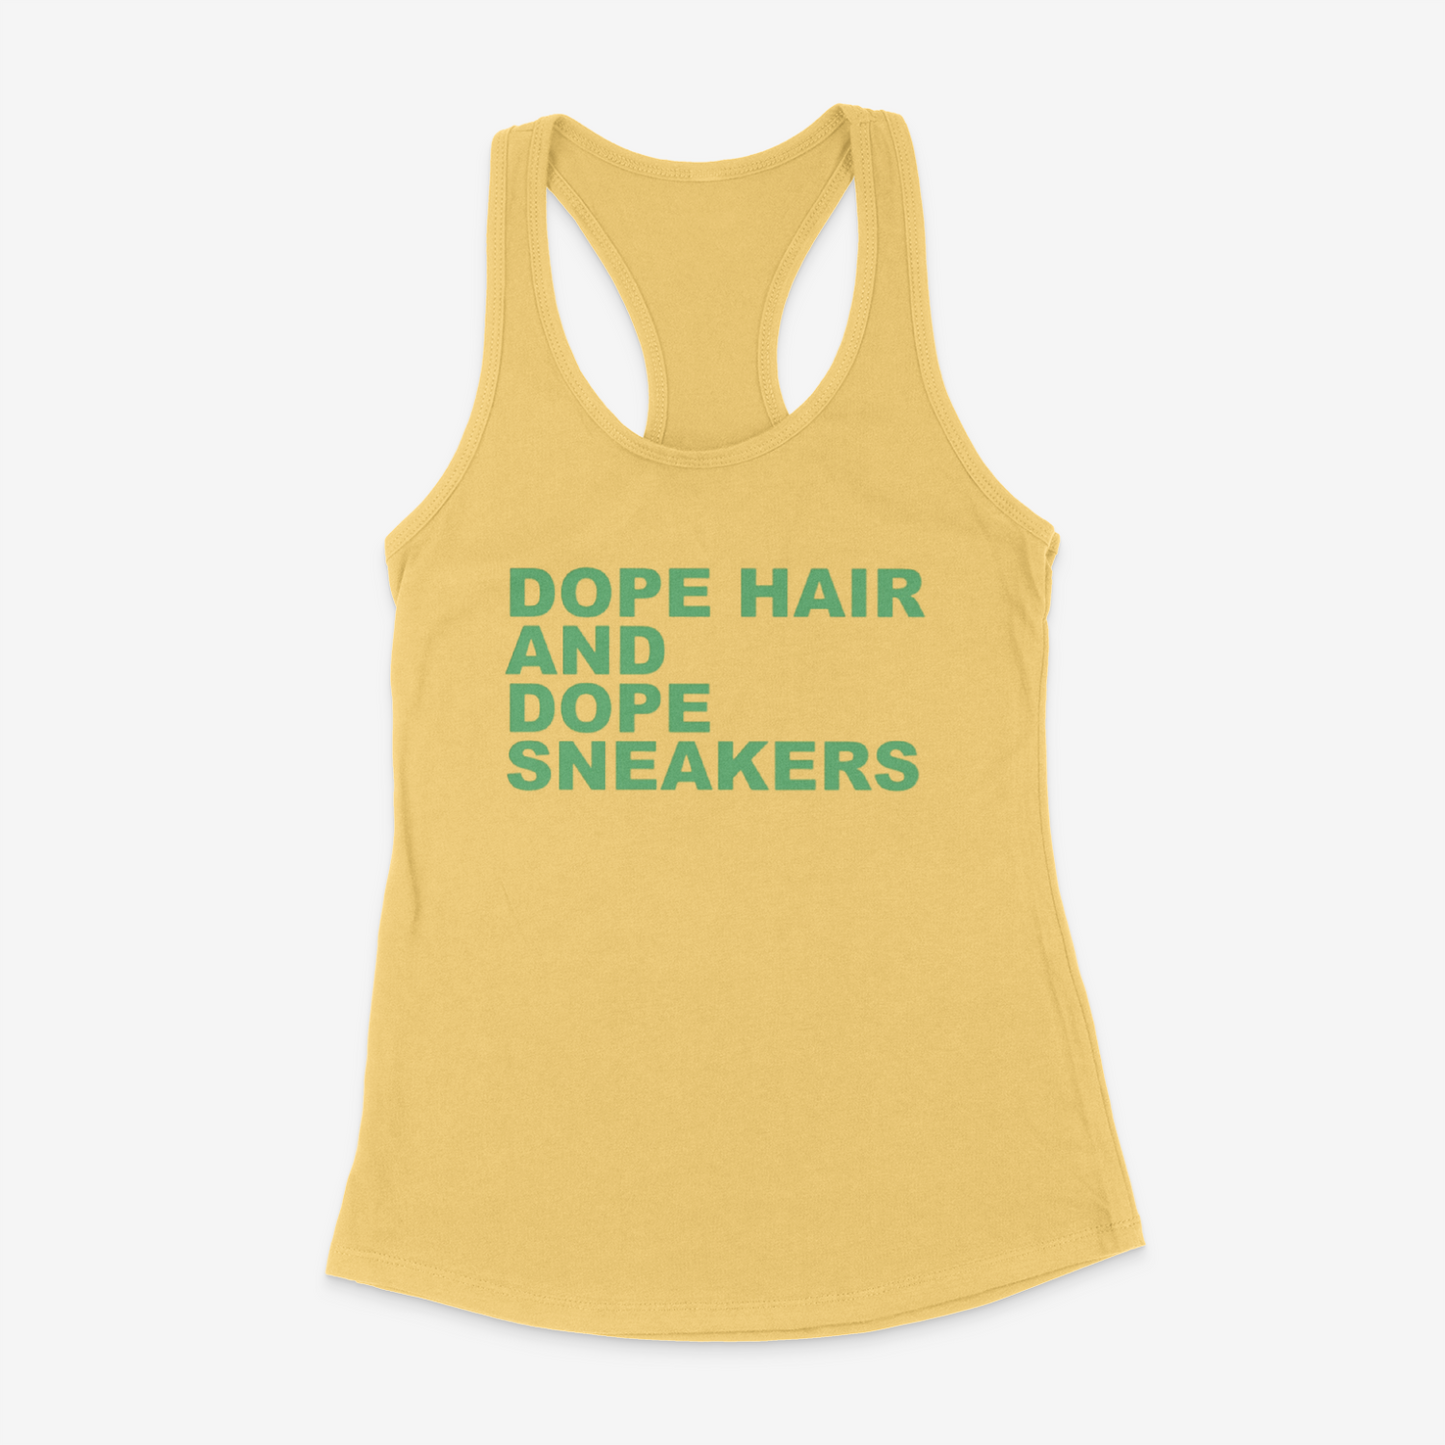 Dope Hair and Dope Sneakers Tank Top (Green)